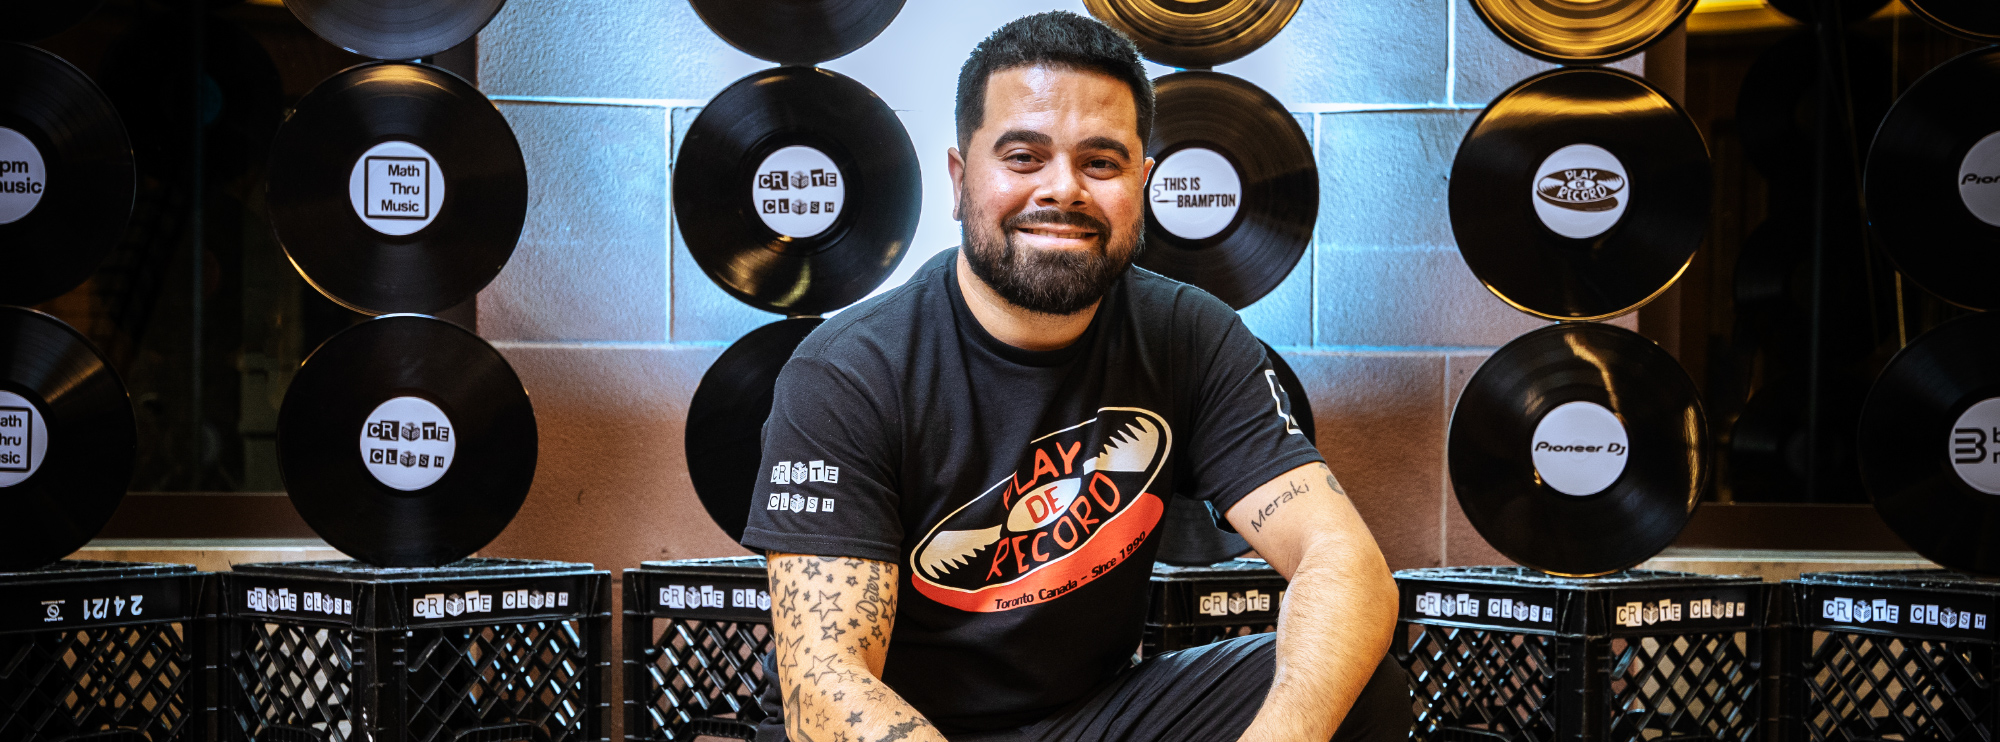 Man sitting and smiling in front of a wall decorated with vinyl records, wearing a "Play De Record" shirt.